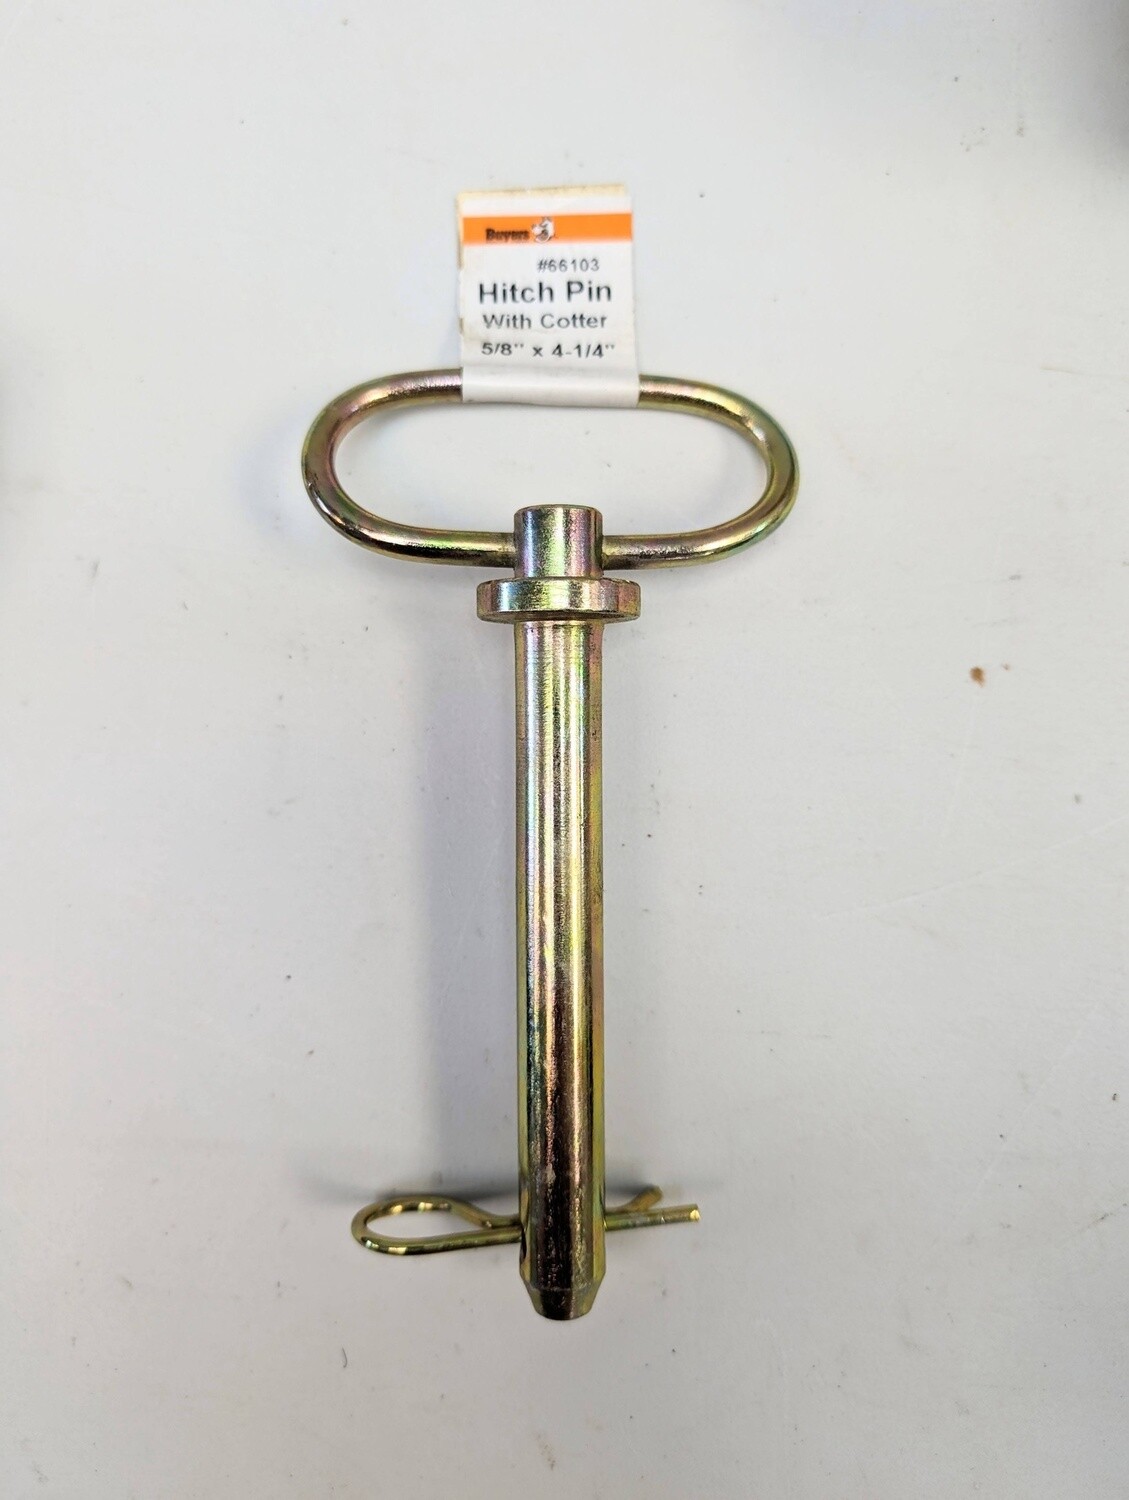 BUYERS PRODUCTS Hitch Pin: 5/8 in Pin Dia, 4 1/4 in Overall Lg, 4 1/4 in Usable Lg, Cotter Pin